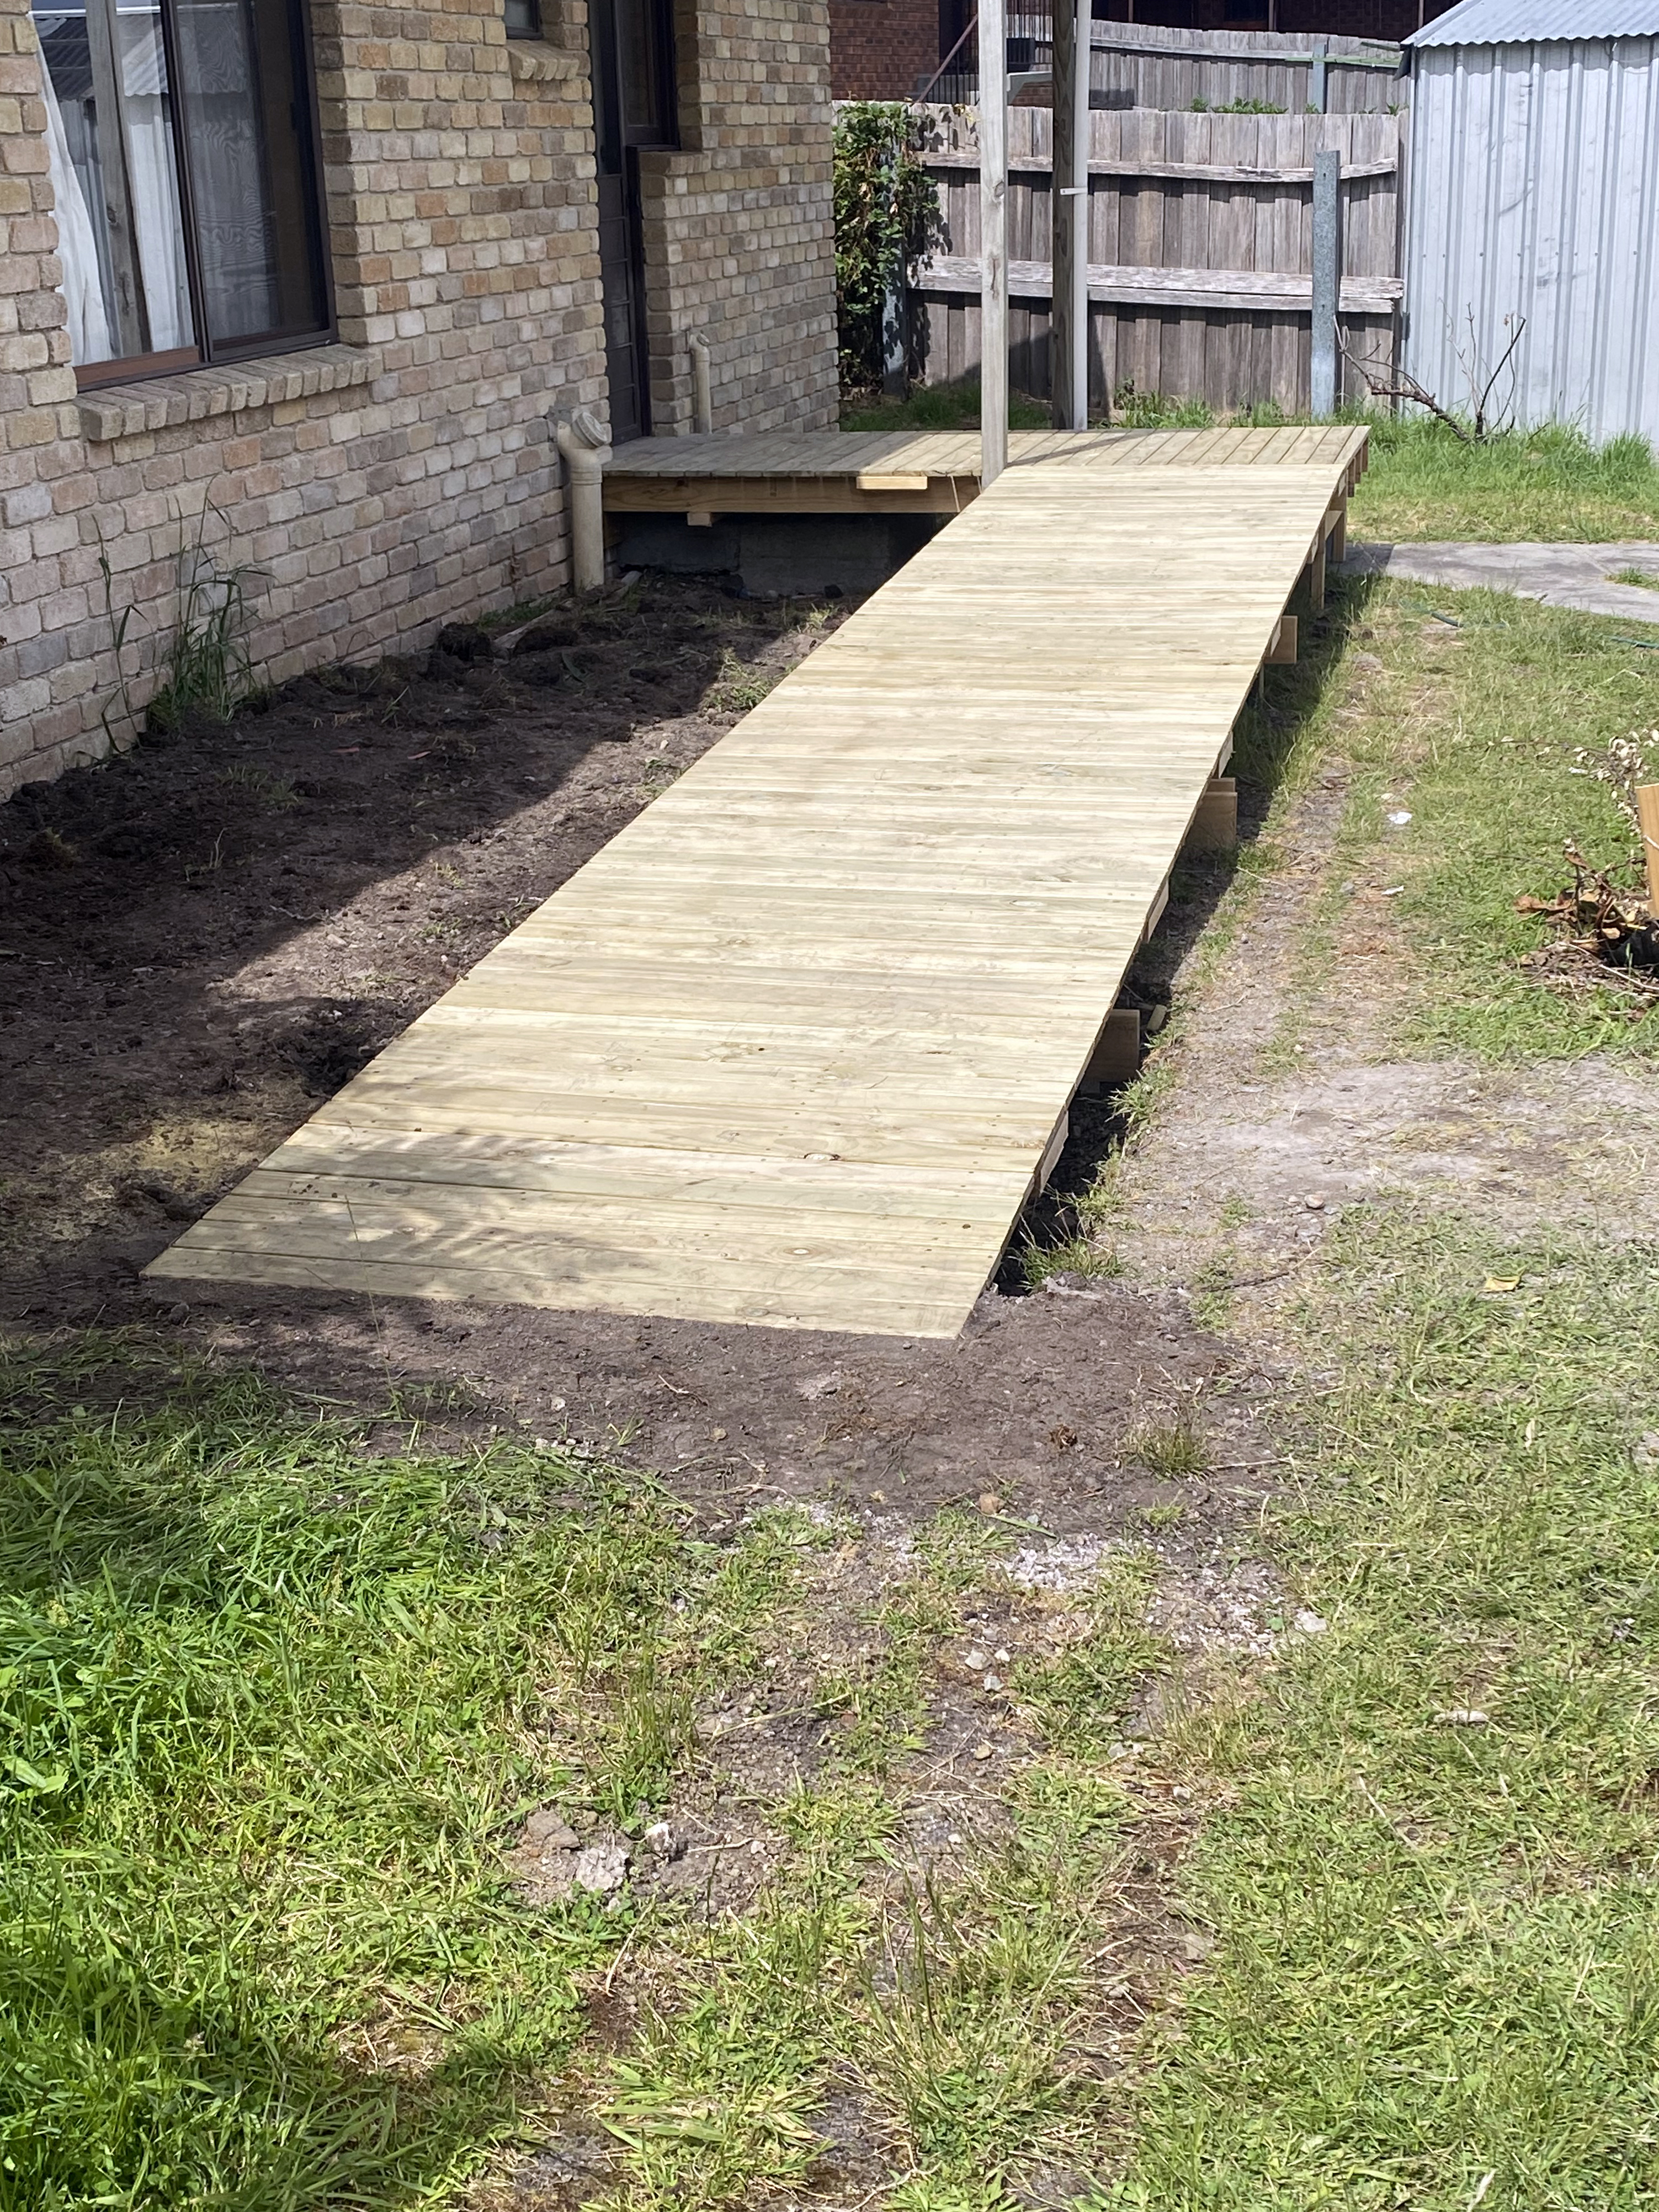 A wheelchair ramp under construction outside a home